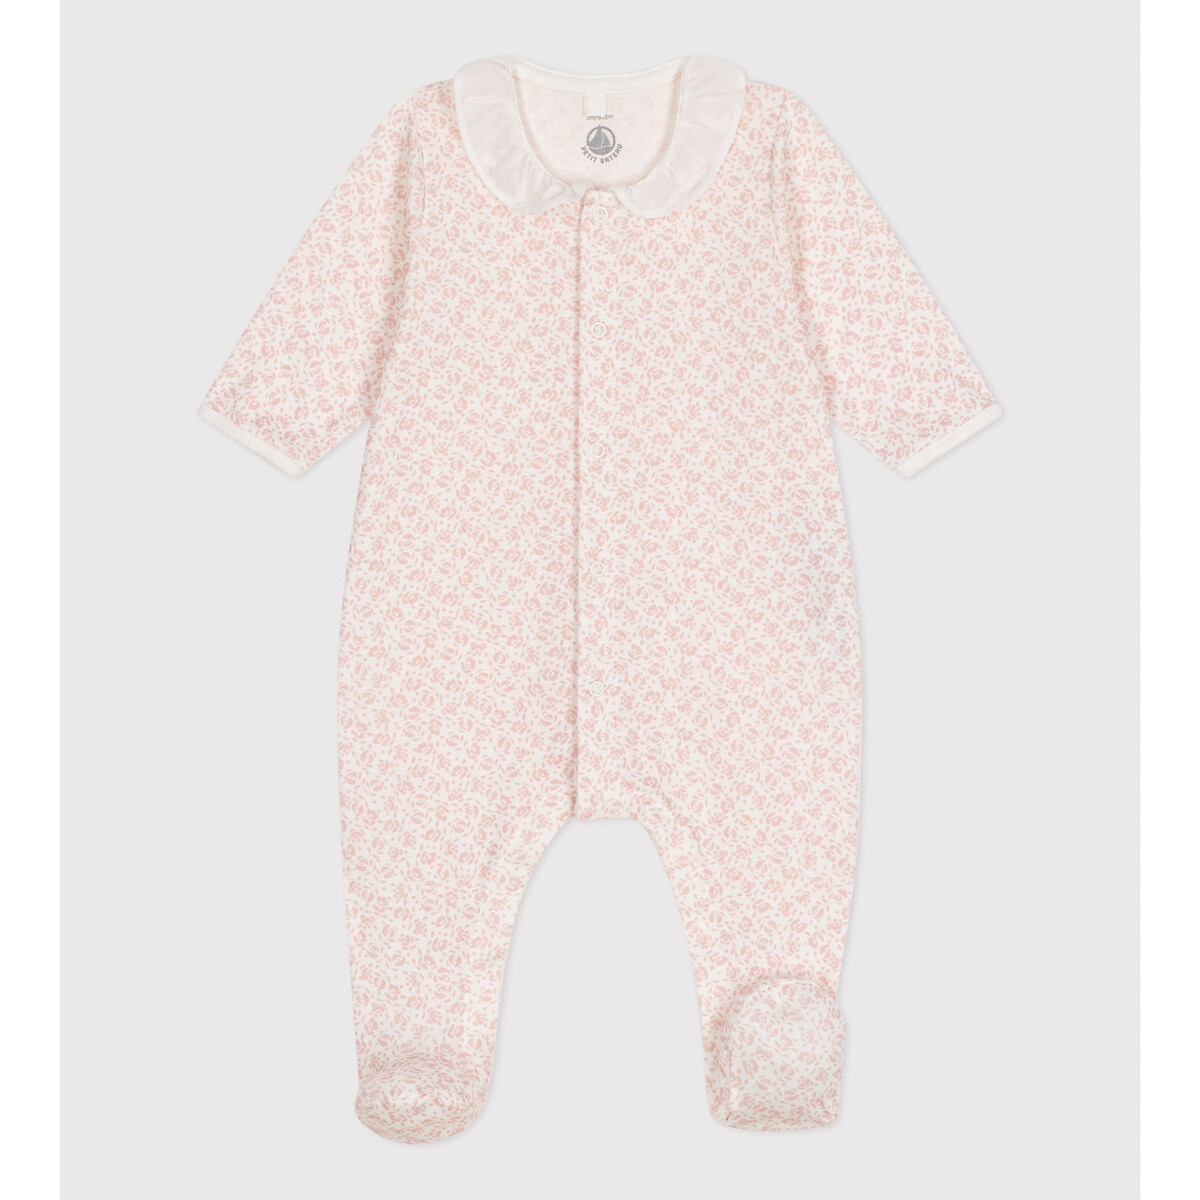 Floral Print Cotton Sleepsuit with Peter Pan Collar